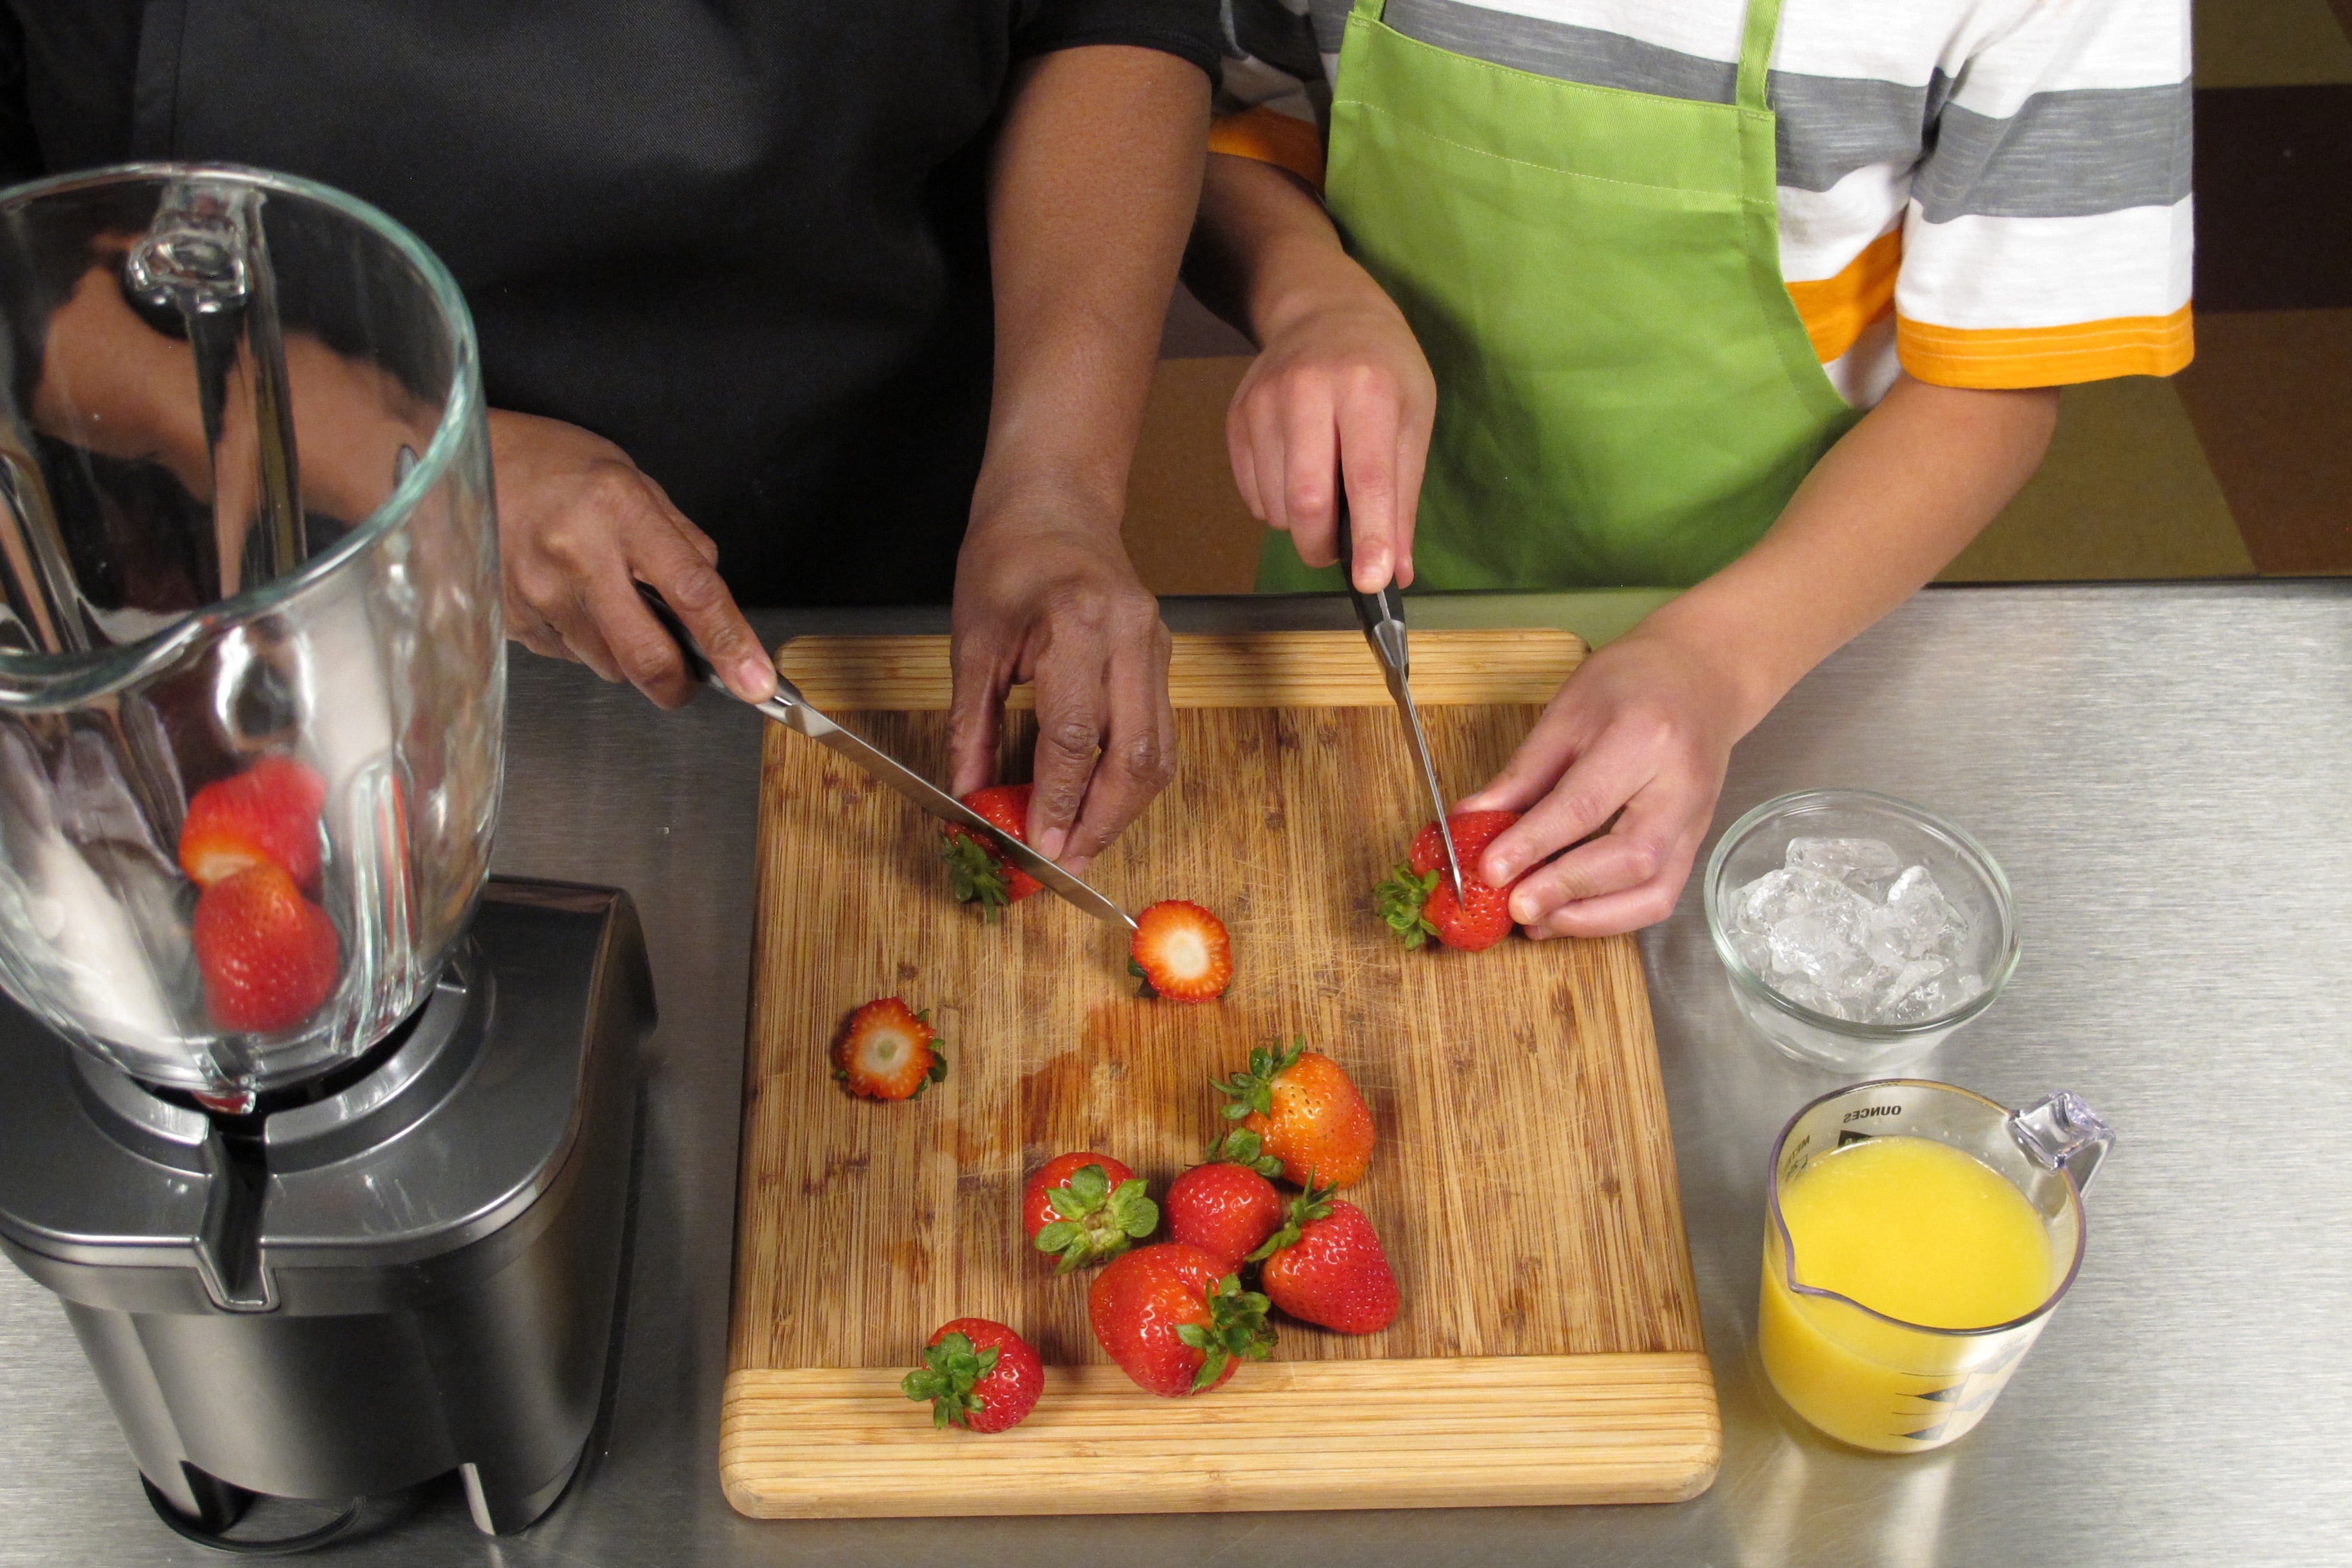 Remove stem and leaves and cut strawberries in half. Younger children can use a plastic knife for this step if desired.